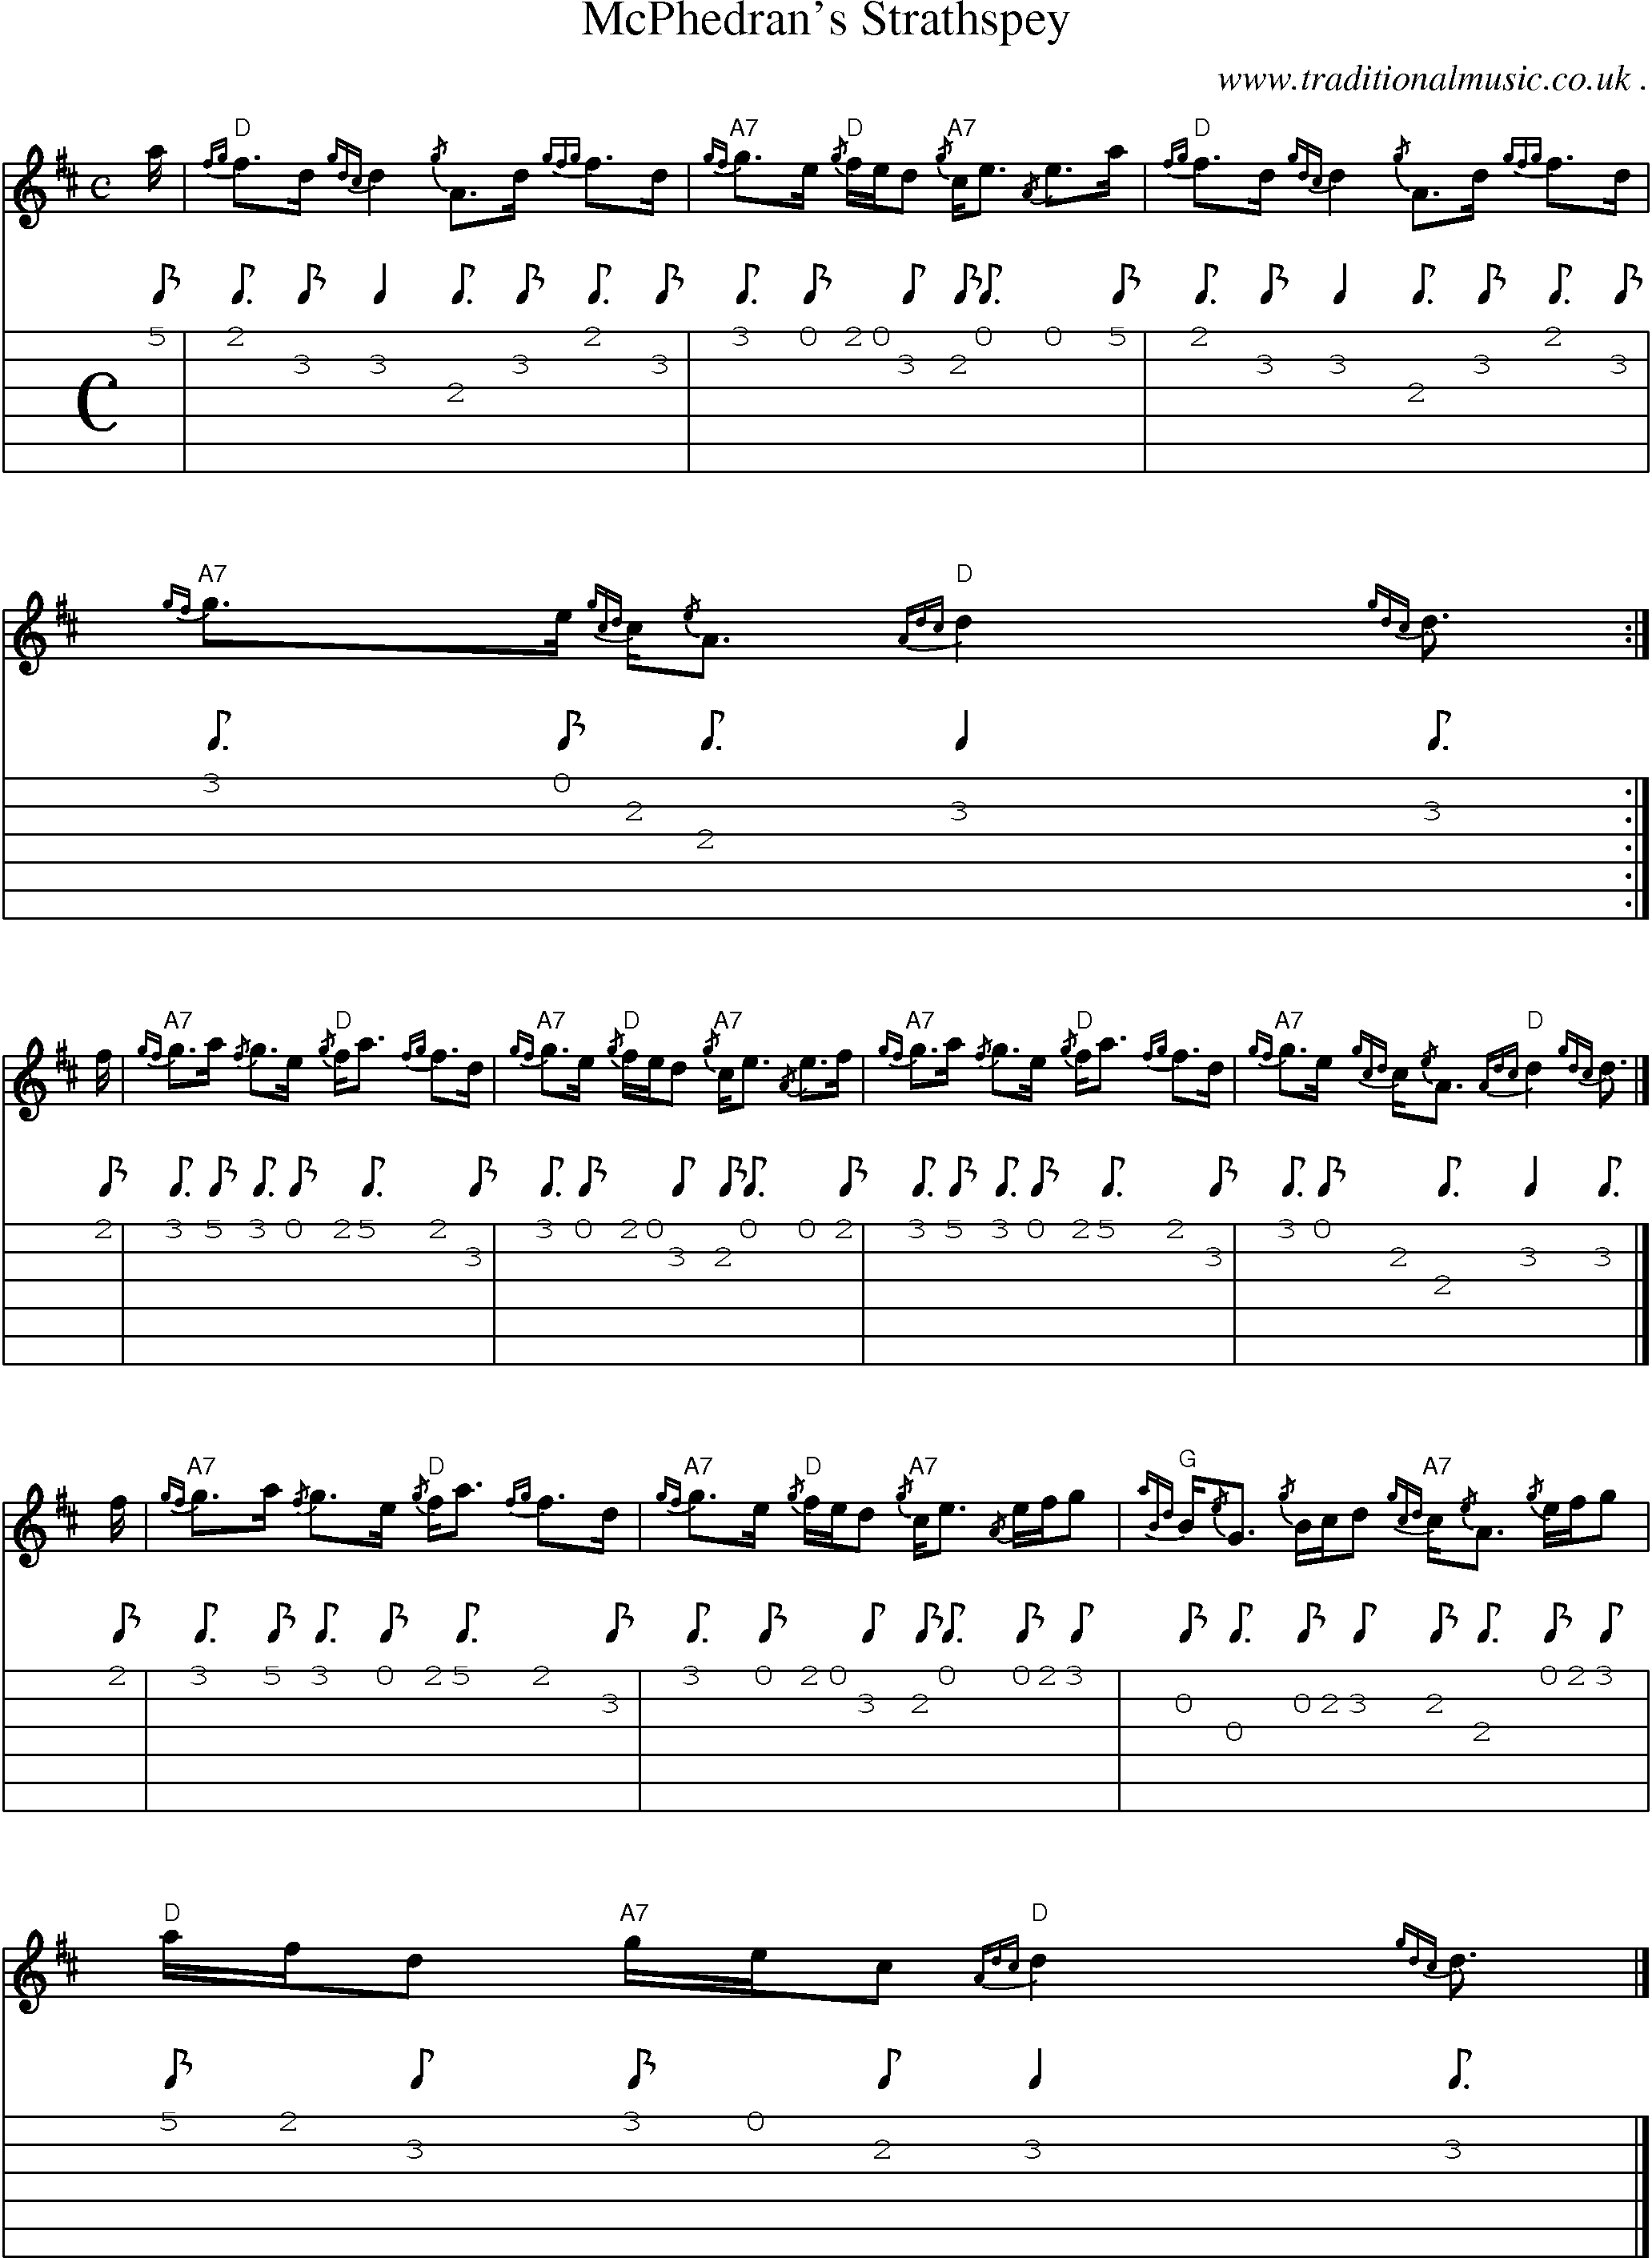 Sheet-music  score, Chords and Guitar Tabs for Mcphedrans Strathspey